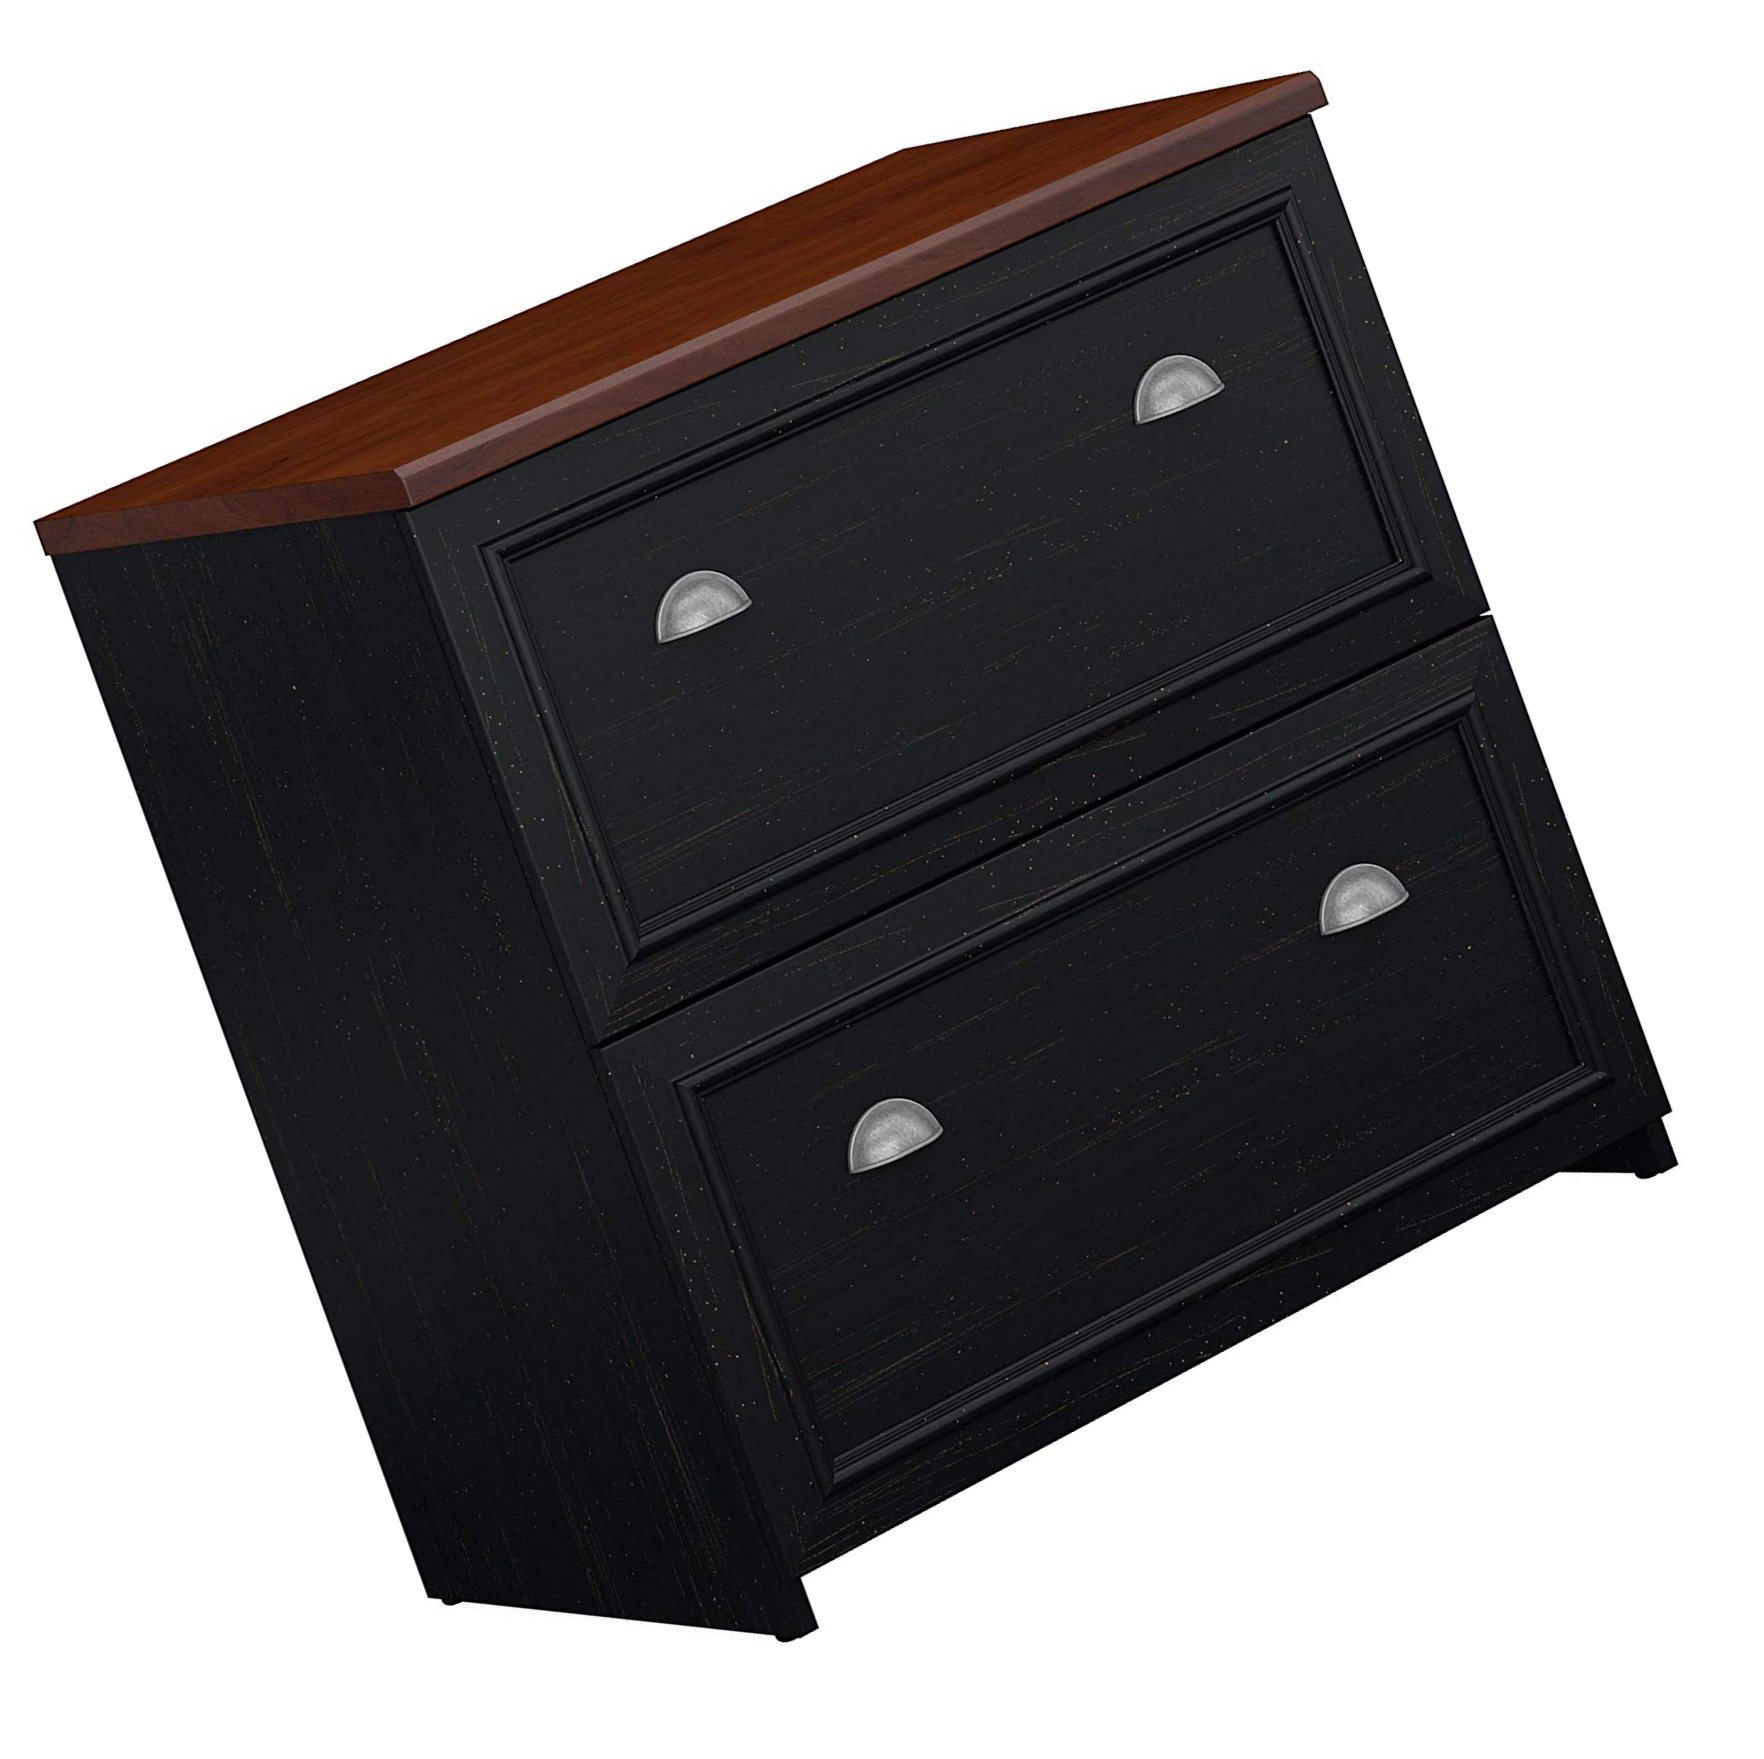 Bush Furniture Fairview Lateral File Cabinet In Antique Black within sizing 1764 X 1759